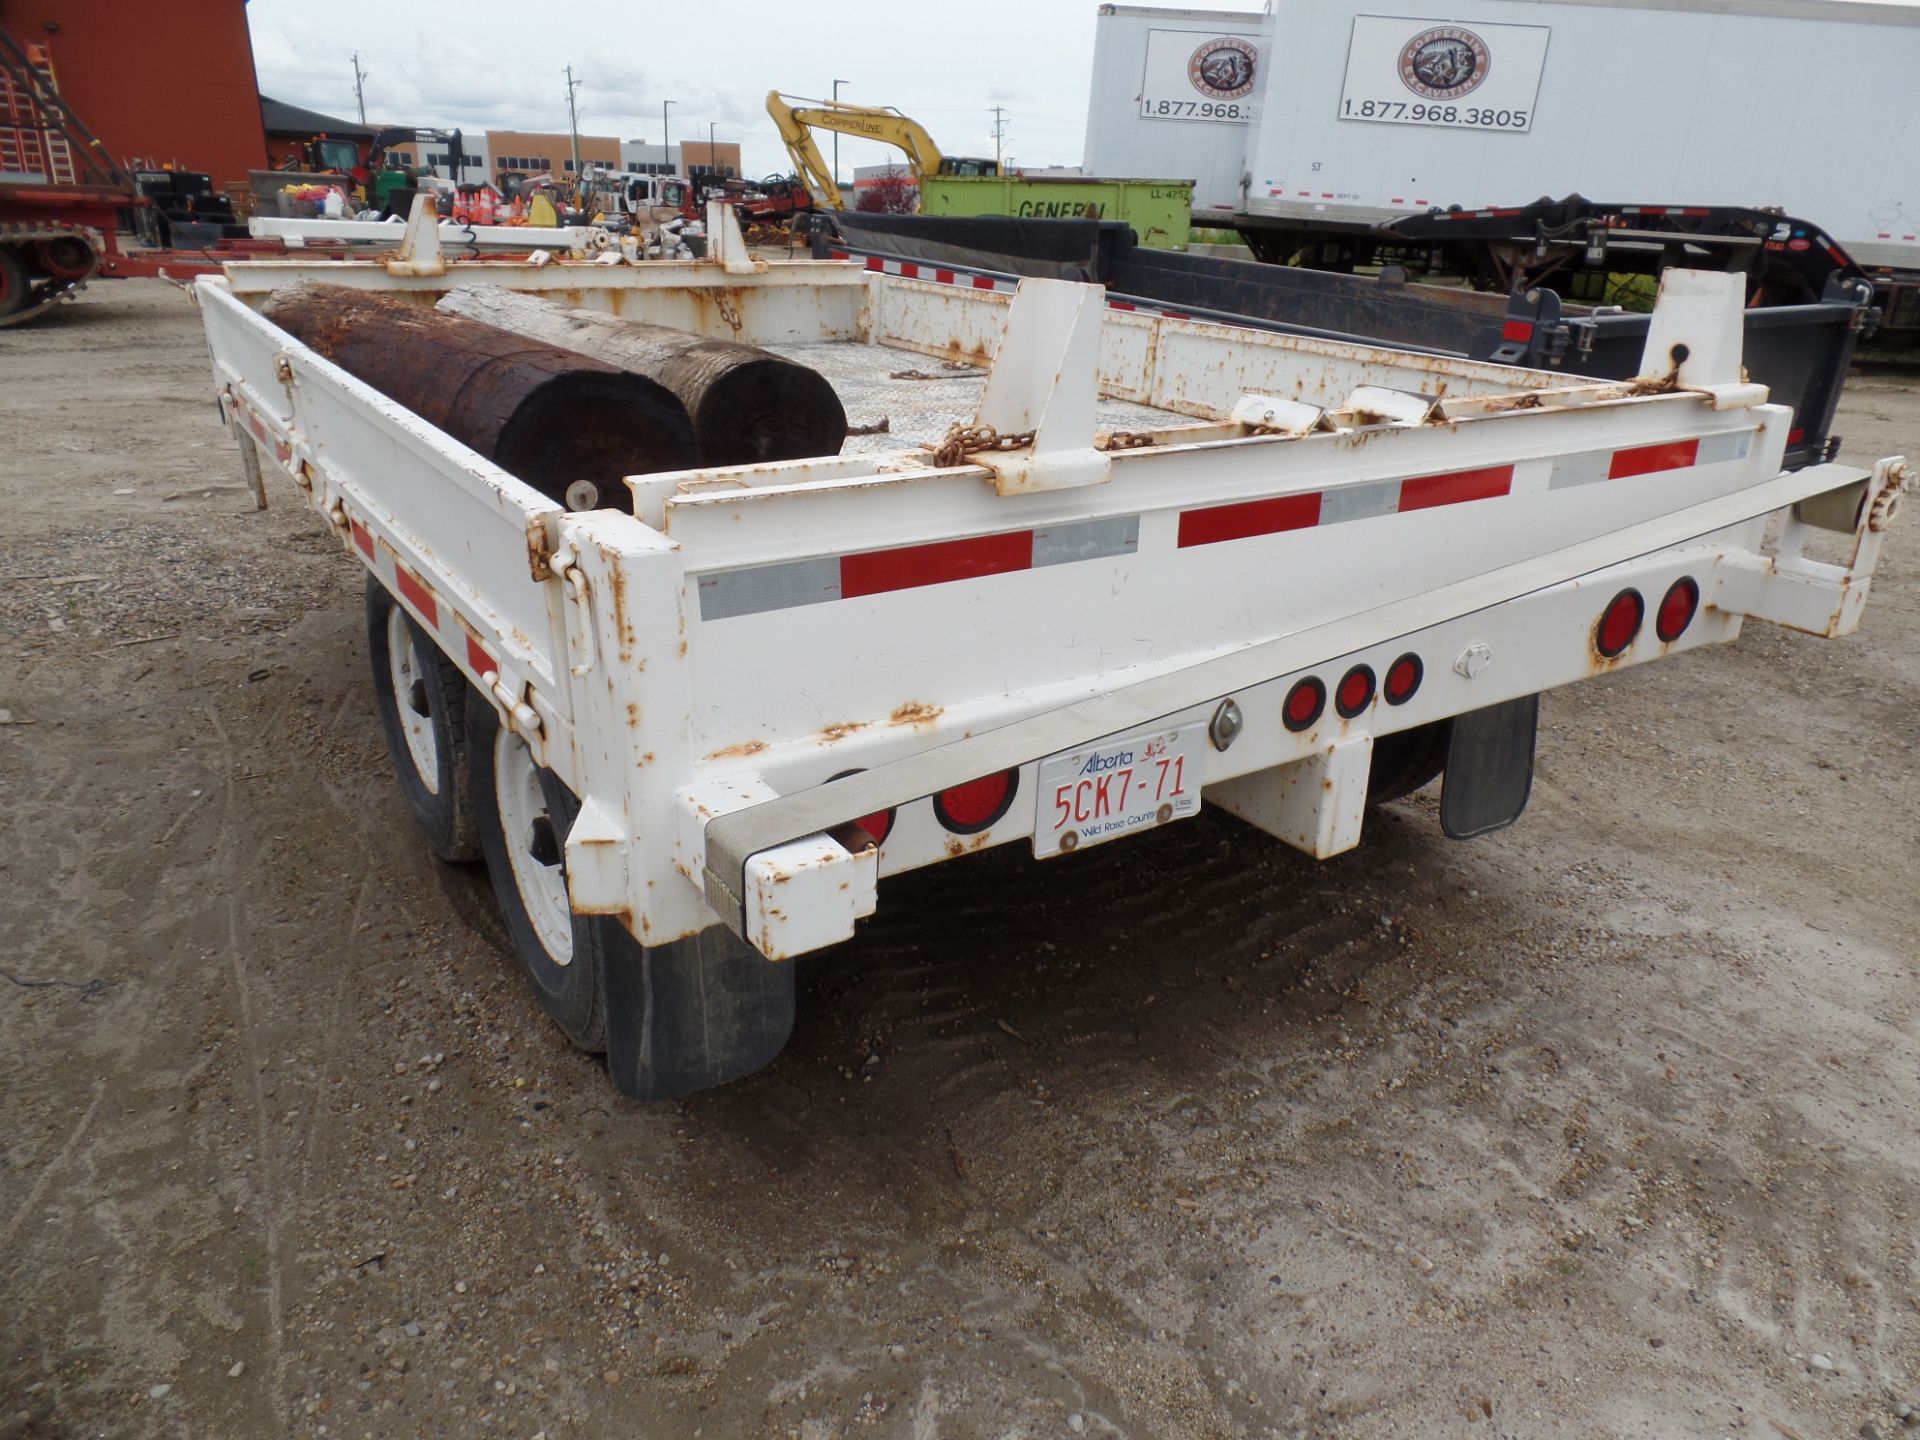 POLE TRAILER - 141" BOX, ELEC BRAKES, T/A, 25'6" OVERALL LENGTH, VIN: 1B9PS1221M274080 - Image 5 of 7